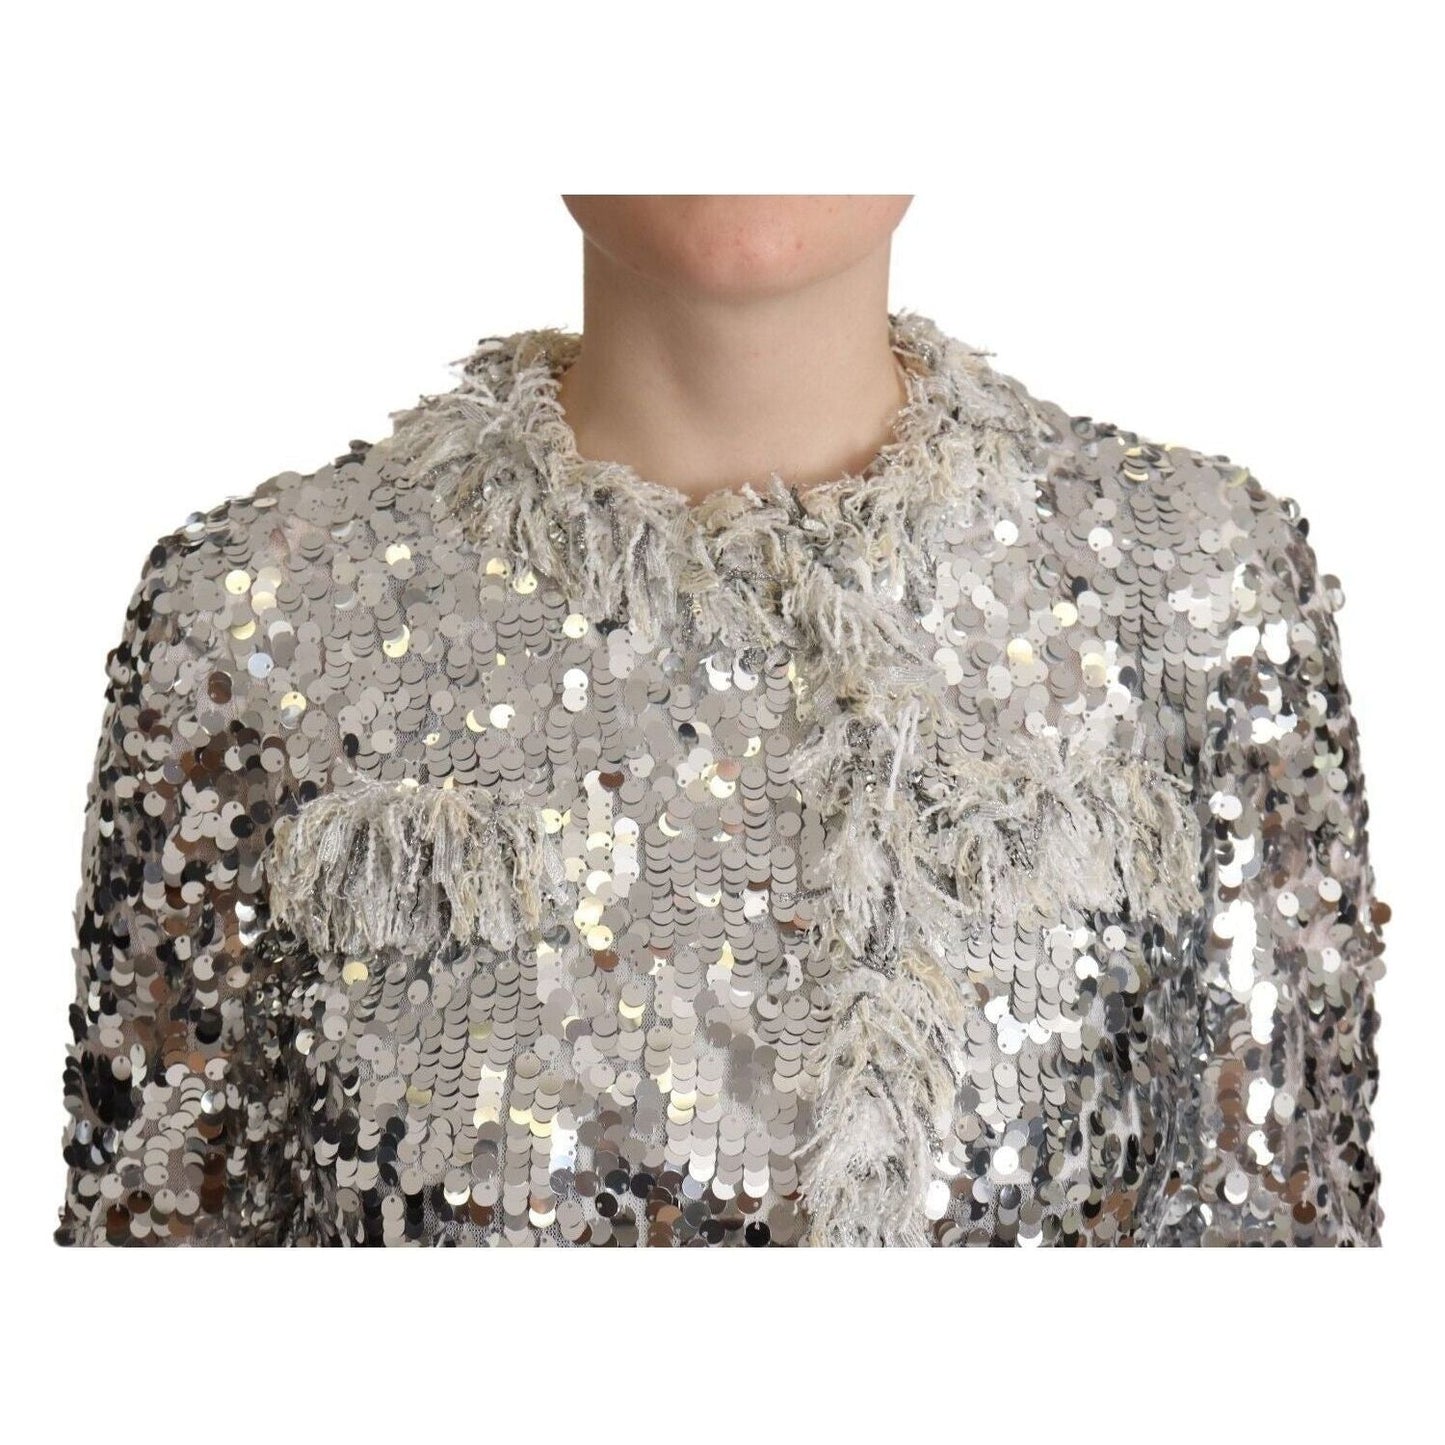 Dolce & Gabbana Chic Silver Sequined Jacket Coat silver-sequined-shearling-long-sleeves-jacket s-l1600-47-2-29ce4e7d-92a.jpg